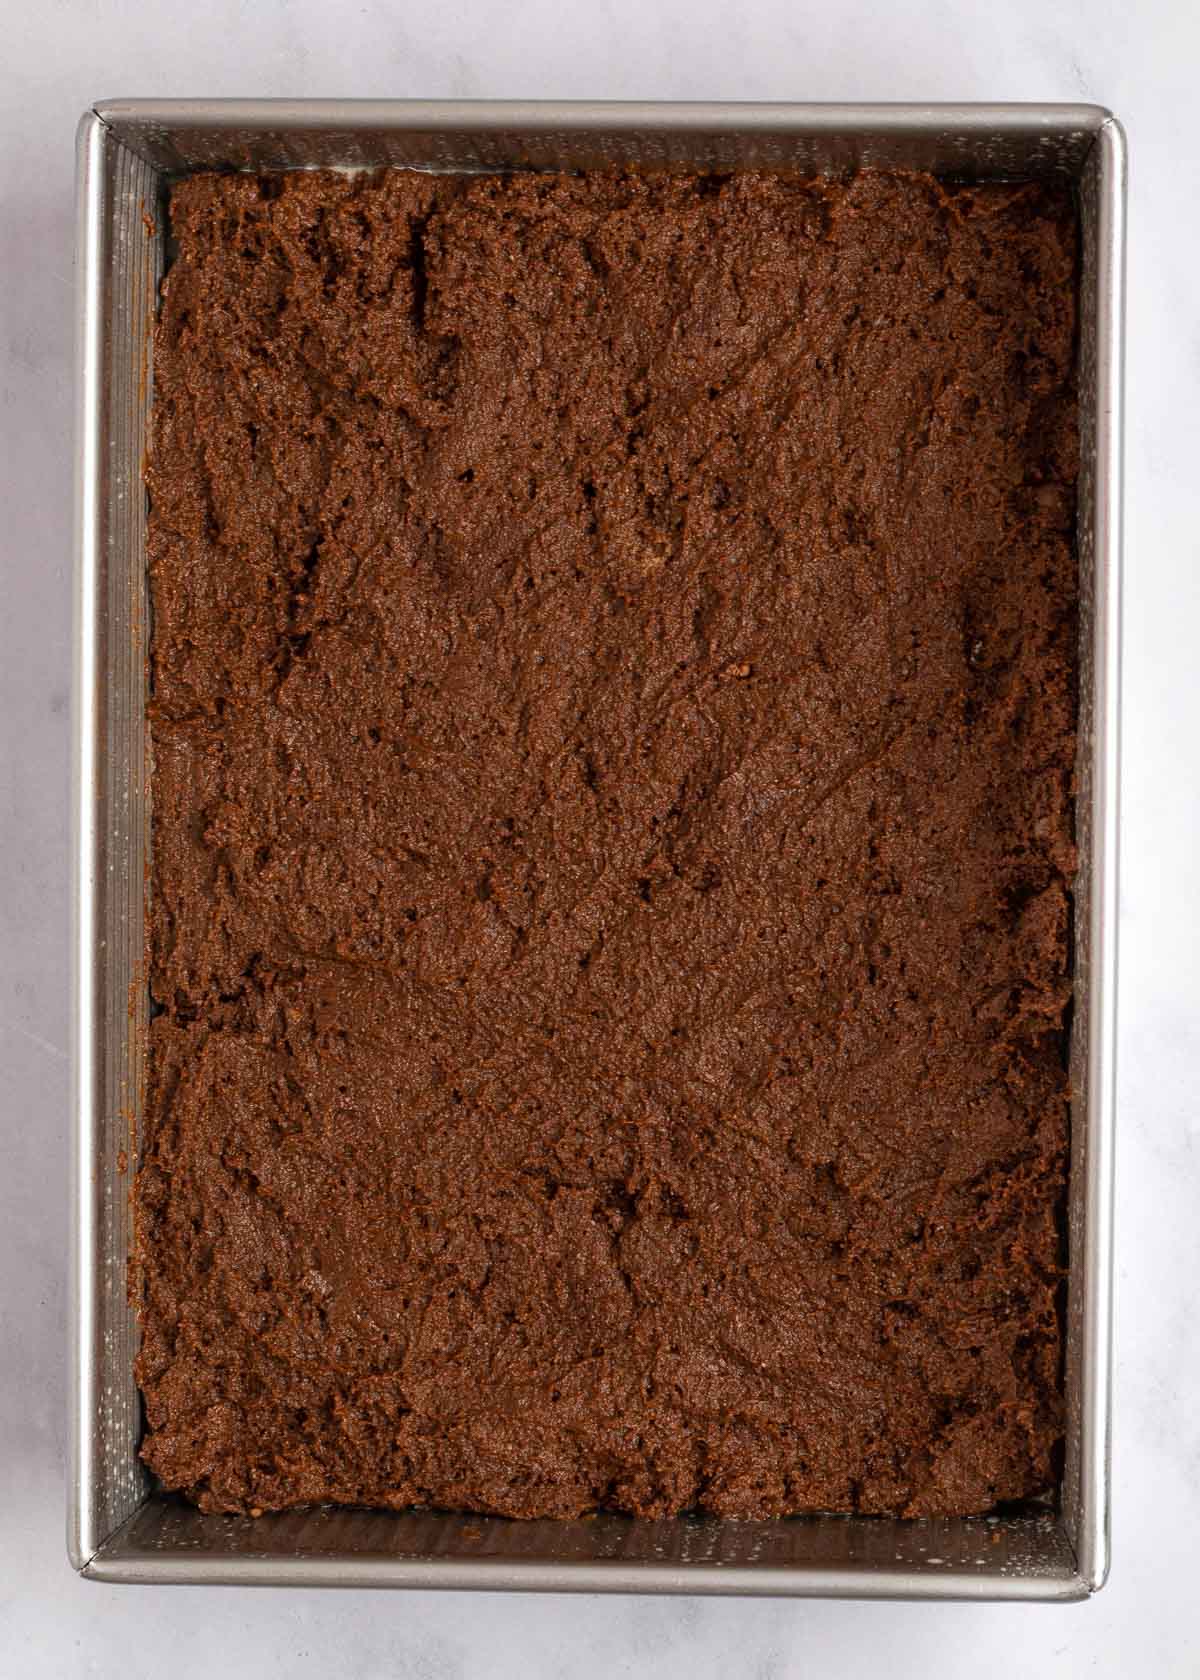 Overhead view of an unbaked chocolate cake in a cake pan